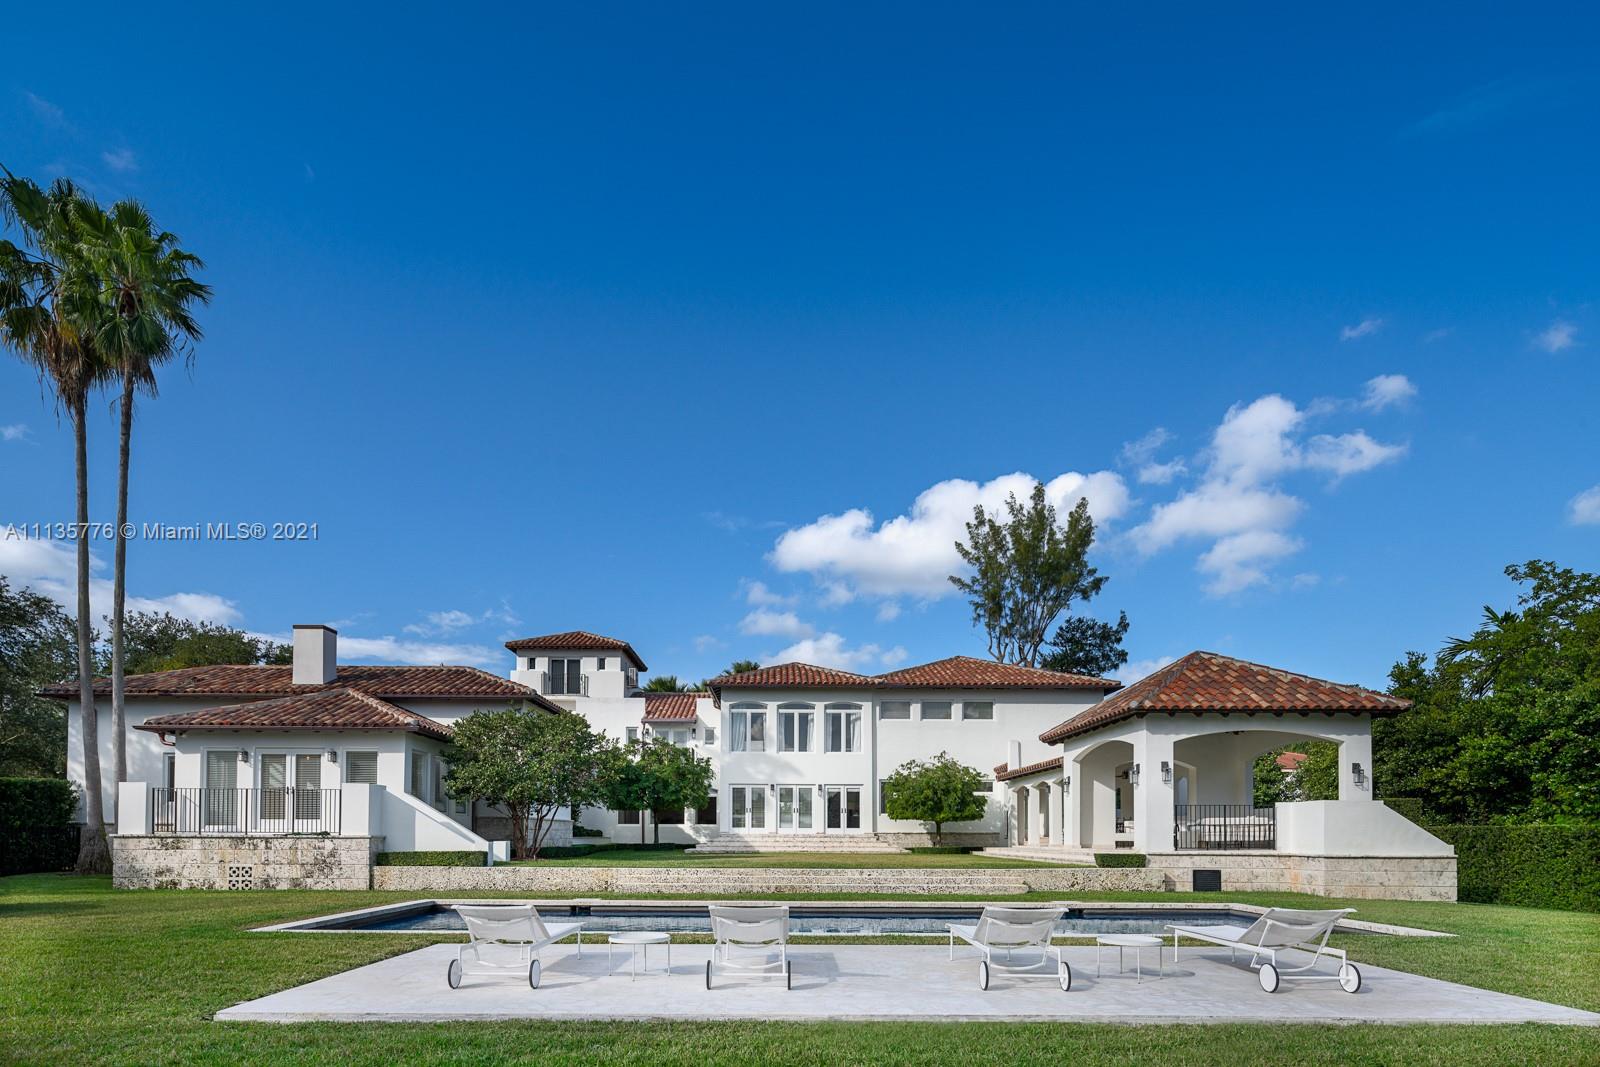 Perfect pairing of Palm Beach & Gables Estates.Elegant, private, turn-key & ideally located on 1 acre in one of the most exclusive gated communities.Designed by Briggs Edward Solomon,this masterpiece features 9 beds & 7/3 baths.Sleek, chef’s kitchen, equipped w professional grade appliances features a 15' Nero Marquina marble cooking island, 3 refrigerators, 3 freezers, custom Viking gas stove & ample prep/storage spaces.Serene primary suite includes a sitting area, grand walk-in closets & luxurious, Carrera marble bathroom.Spa/gym is the epitome of home-wellness w sport sauna, Peleton & top pf the line equipment.Home office, playroom & ensuite bedrooms complete this estate.Manicured lawn, saltwater lap pool & new outdoor kitchen satisfying the most discerning of tastes.